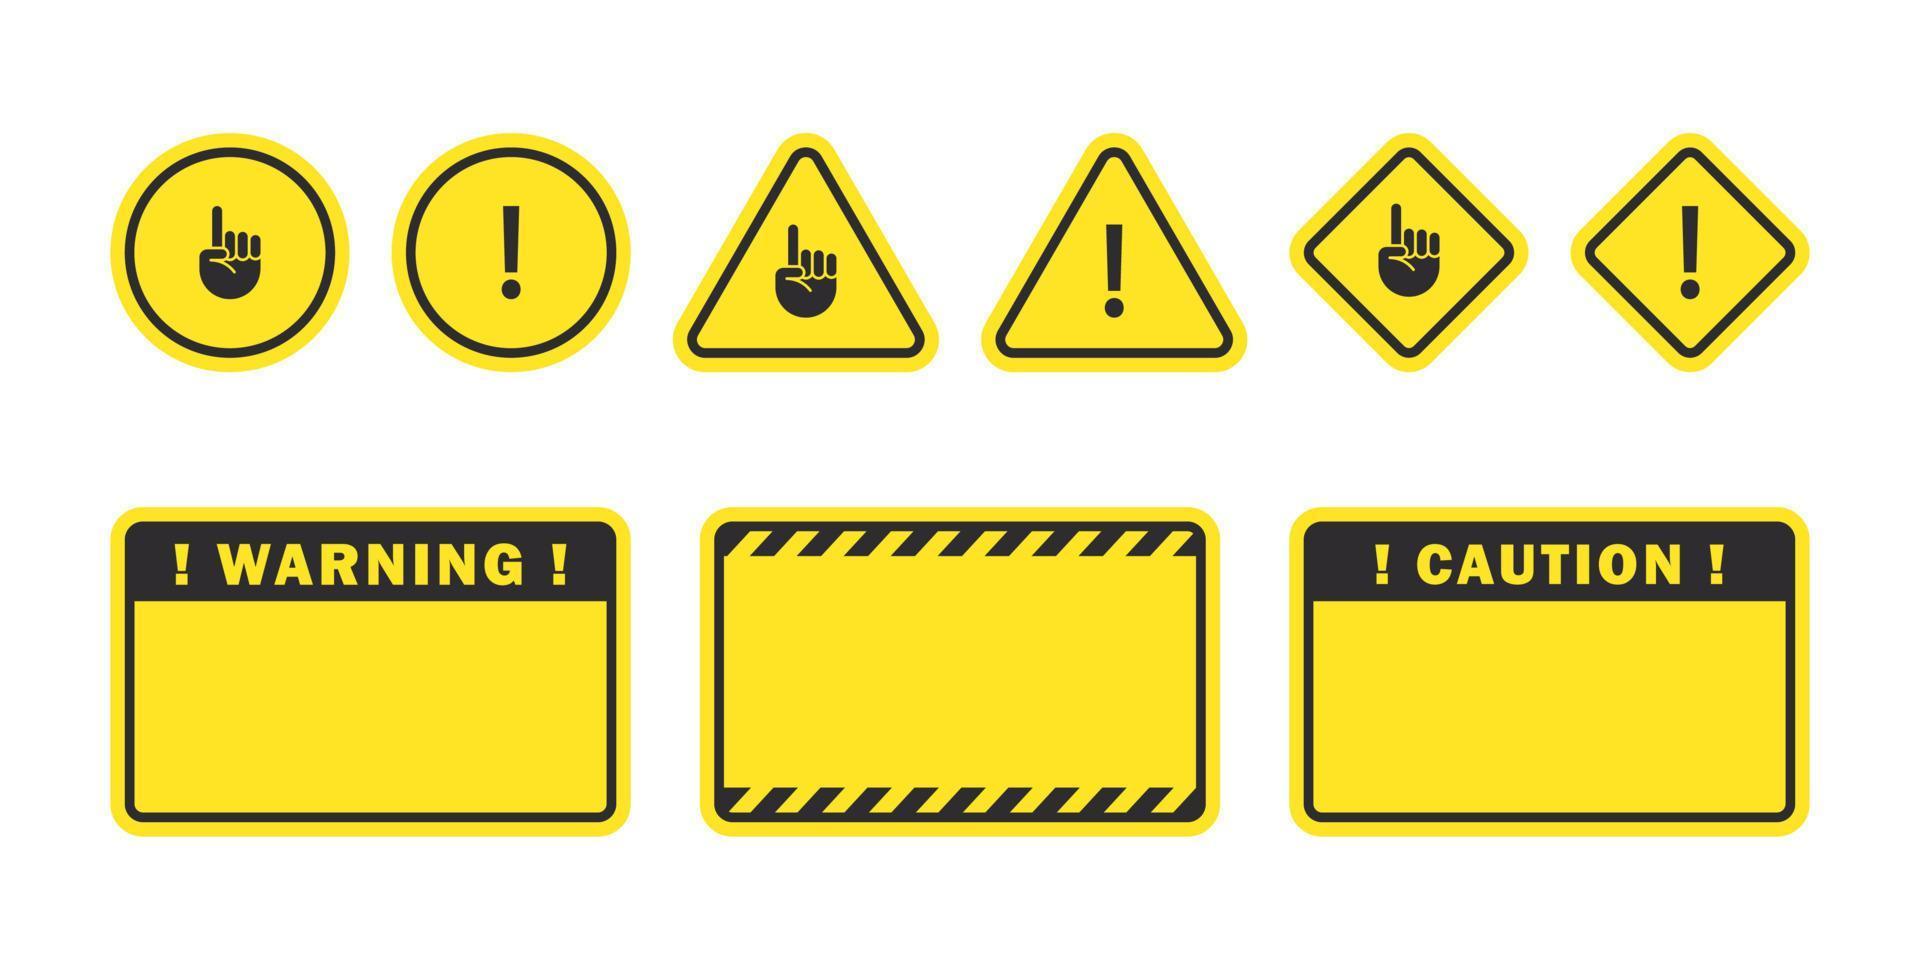 Warning signs. Caution signs. Symbols danger and warning shields. Vector scalable graphics